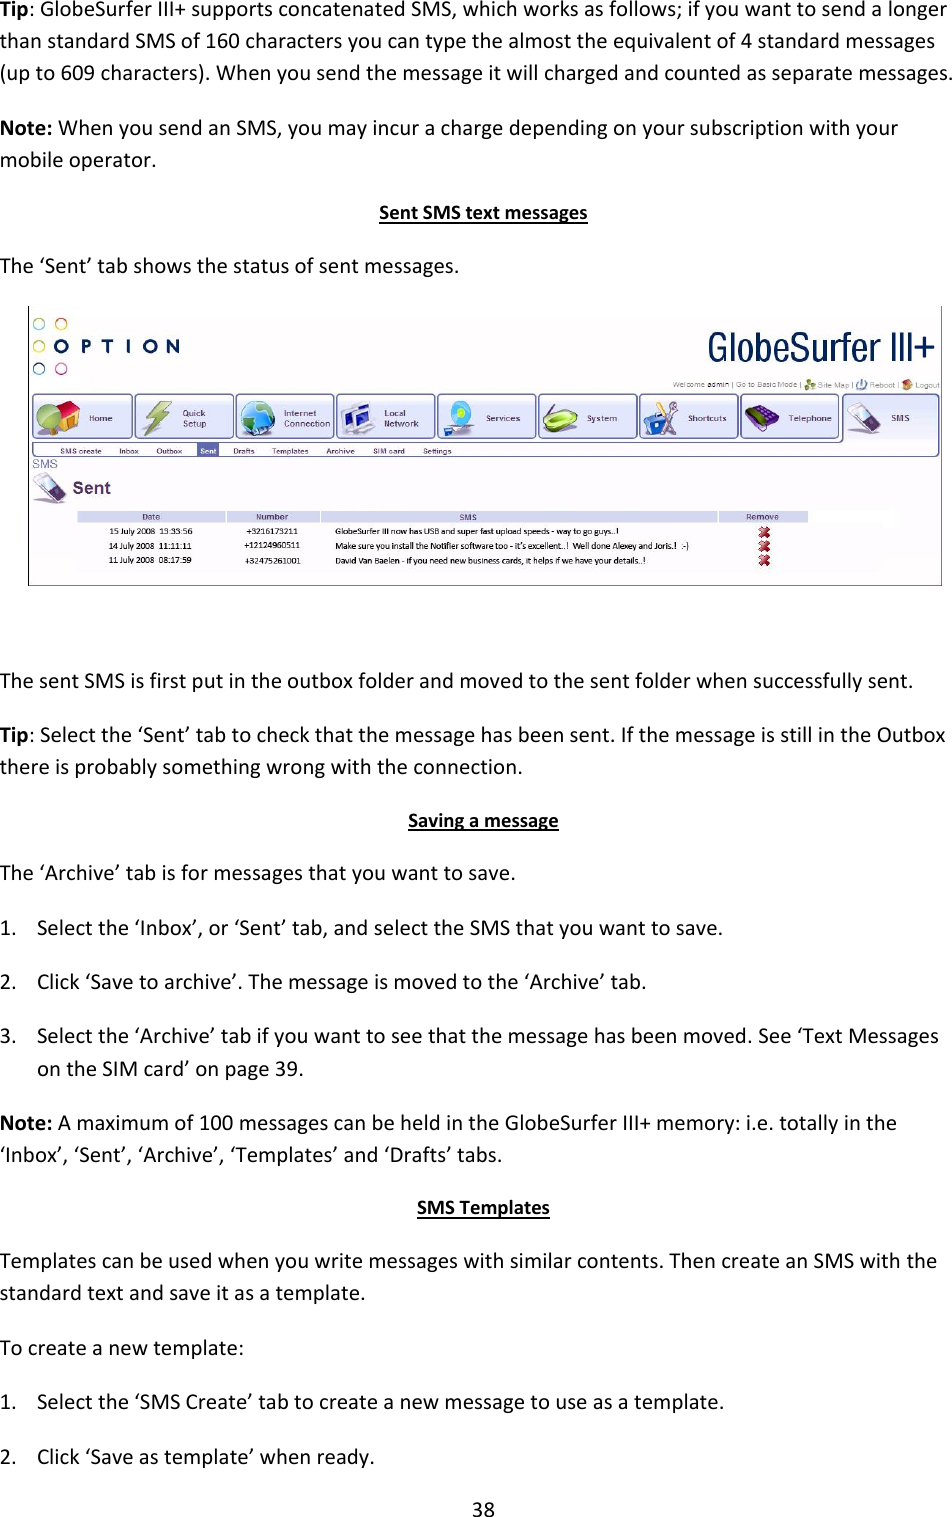 38 Tip: GlobeSurfer III+ supports concatenated SMS, which works as follows; if you want to send a longer than standard SMS of 160 characters you can type the almost the equivalent of 4 standard messages (up to 609 characters). When you send the message it will charged and counted as separate messages. Note: When you send an SMS, you may incur a charge depending on your subscription with your mobile operator. Sent SMS text messages The ‘Sent’ tab shows the status of sent messages.   The sent SMS is first put in the outbox folder and moved to the sent folder when successfully sent.  Tip: Select the ‘Sent’ tab to check that the message has been sent. If the message is still in the Outbox there is probably something wrong with the connection. Saving a message The ‘Archive’ tab is for messages that you want to save. 1. Select the ‘Inbox’, or ‘Sent’ tab, and select the SMS that you want to save. 2. Click ‘Save to archive’. The message is moved to the ‘Archive’ tab. 3. Select the ‘Archive’ tab if you want to see that the message has been moved. See ‘Text Messages on the SIM card’ on page 39. Note: A maximum of 100 messages can be held in the GlobeSurfer III+ memory: i.e. totally in the ‘Inbox’, ‘Sent’, ‘Archive’, ‘Templates’ and ‘Drafts’ tabs. SMS Templates Templates can be used when you write messages with similar contents. Then create an SMS with the standard text and save it as a template. To create a new template: 1. Select the ‘SMS Create’ tab to create a new message to use as a template. 2. Click ‘Save as template’ when ready. + 